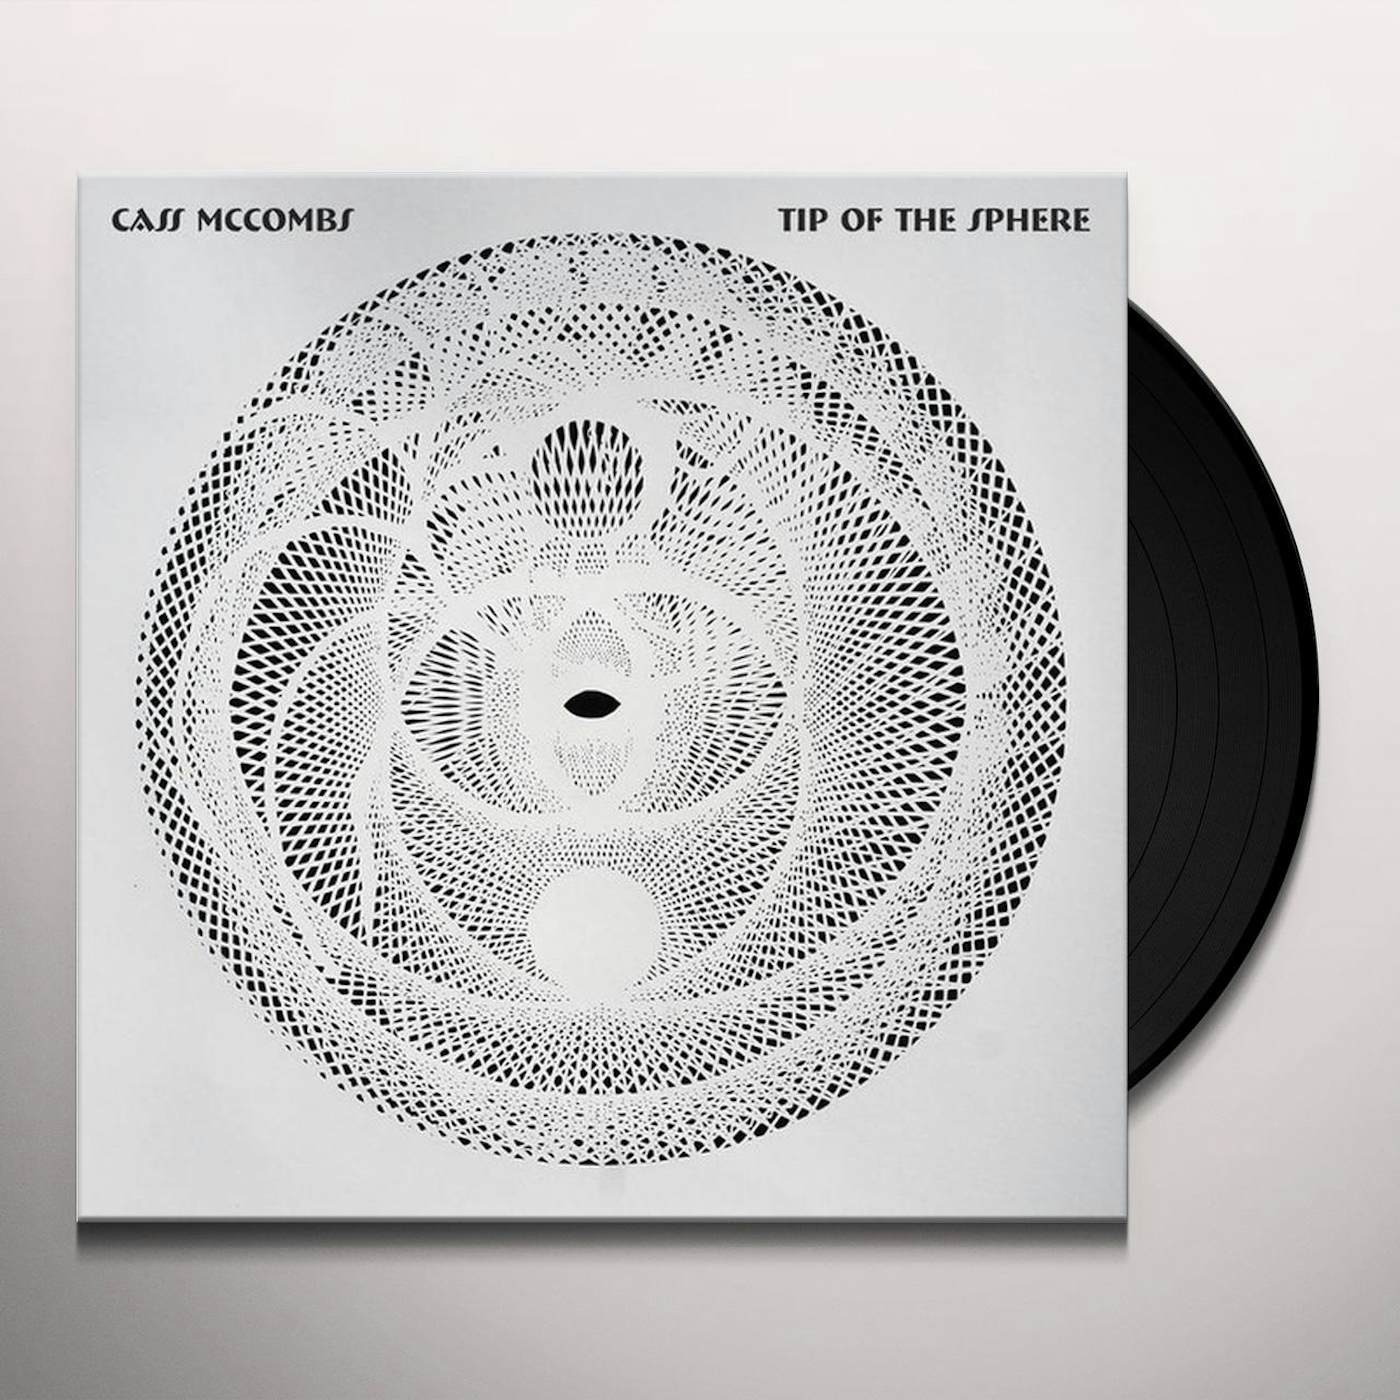 Cass McCombs Tip of the Sphere Vinyl Record